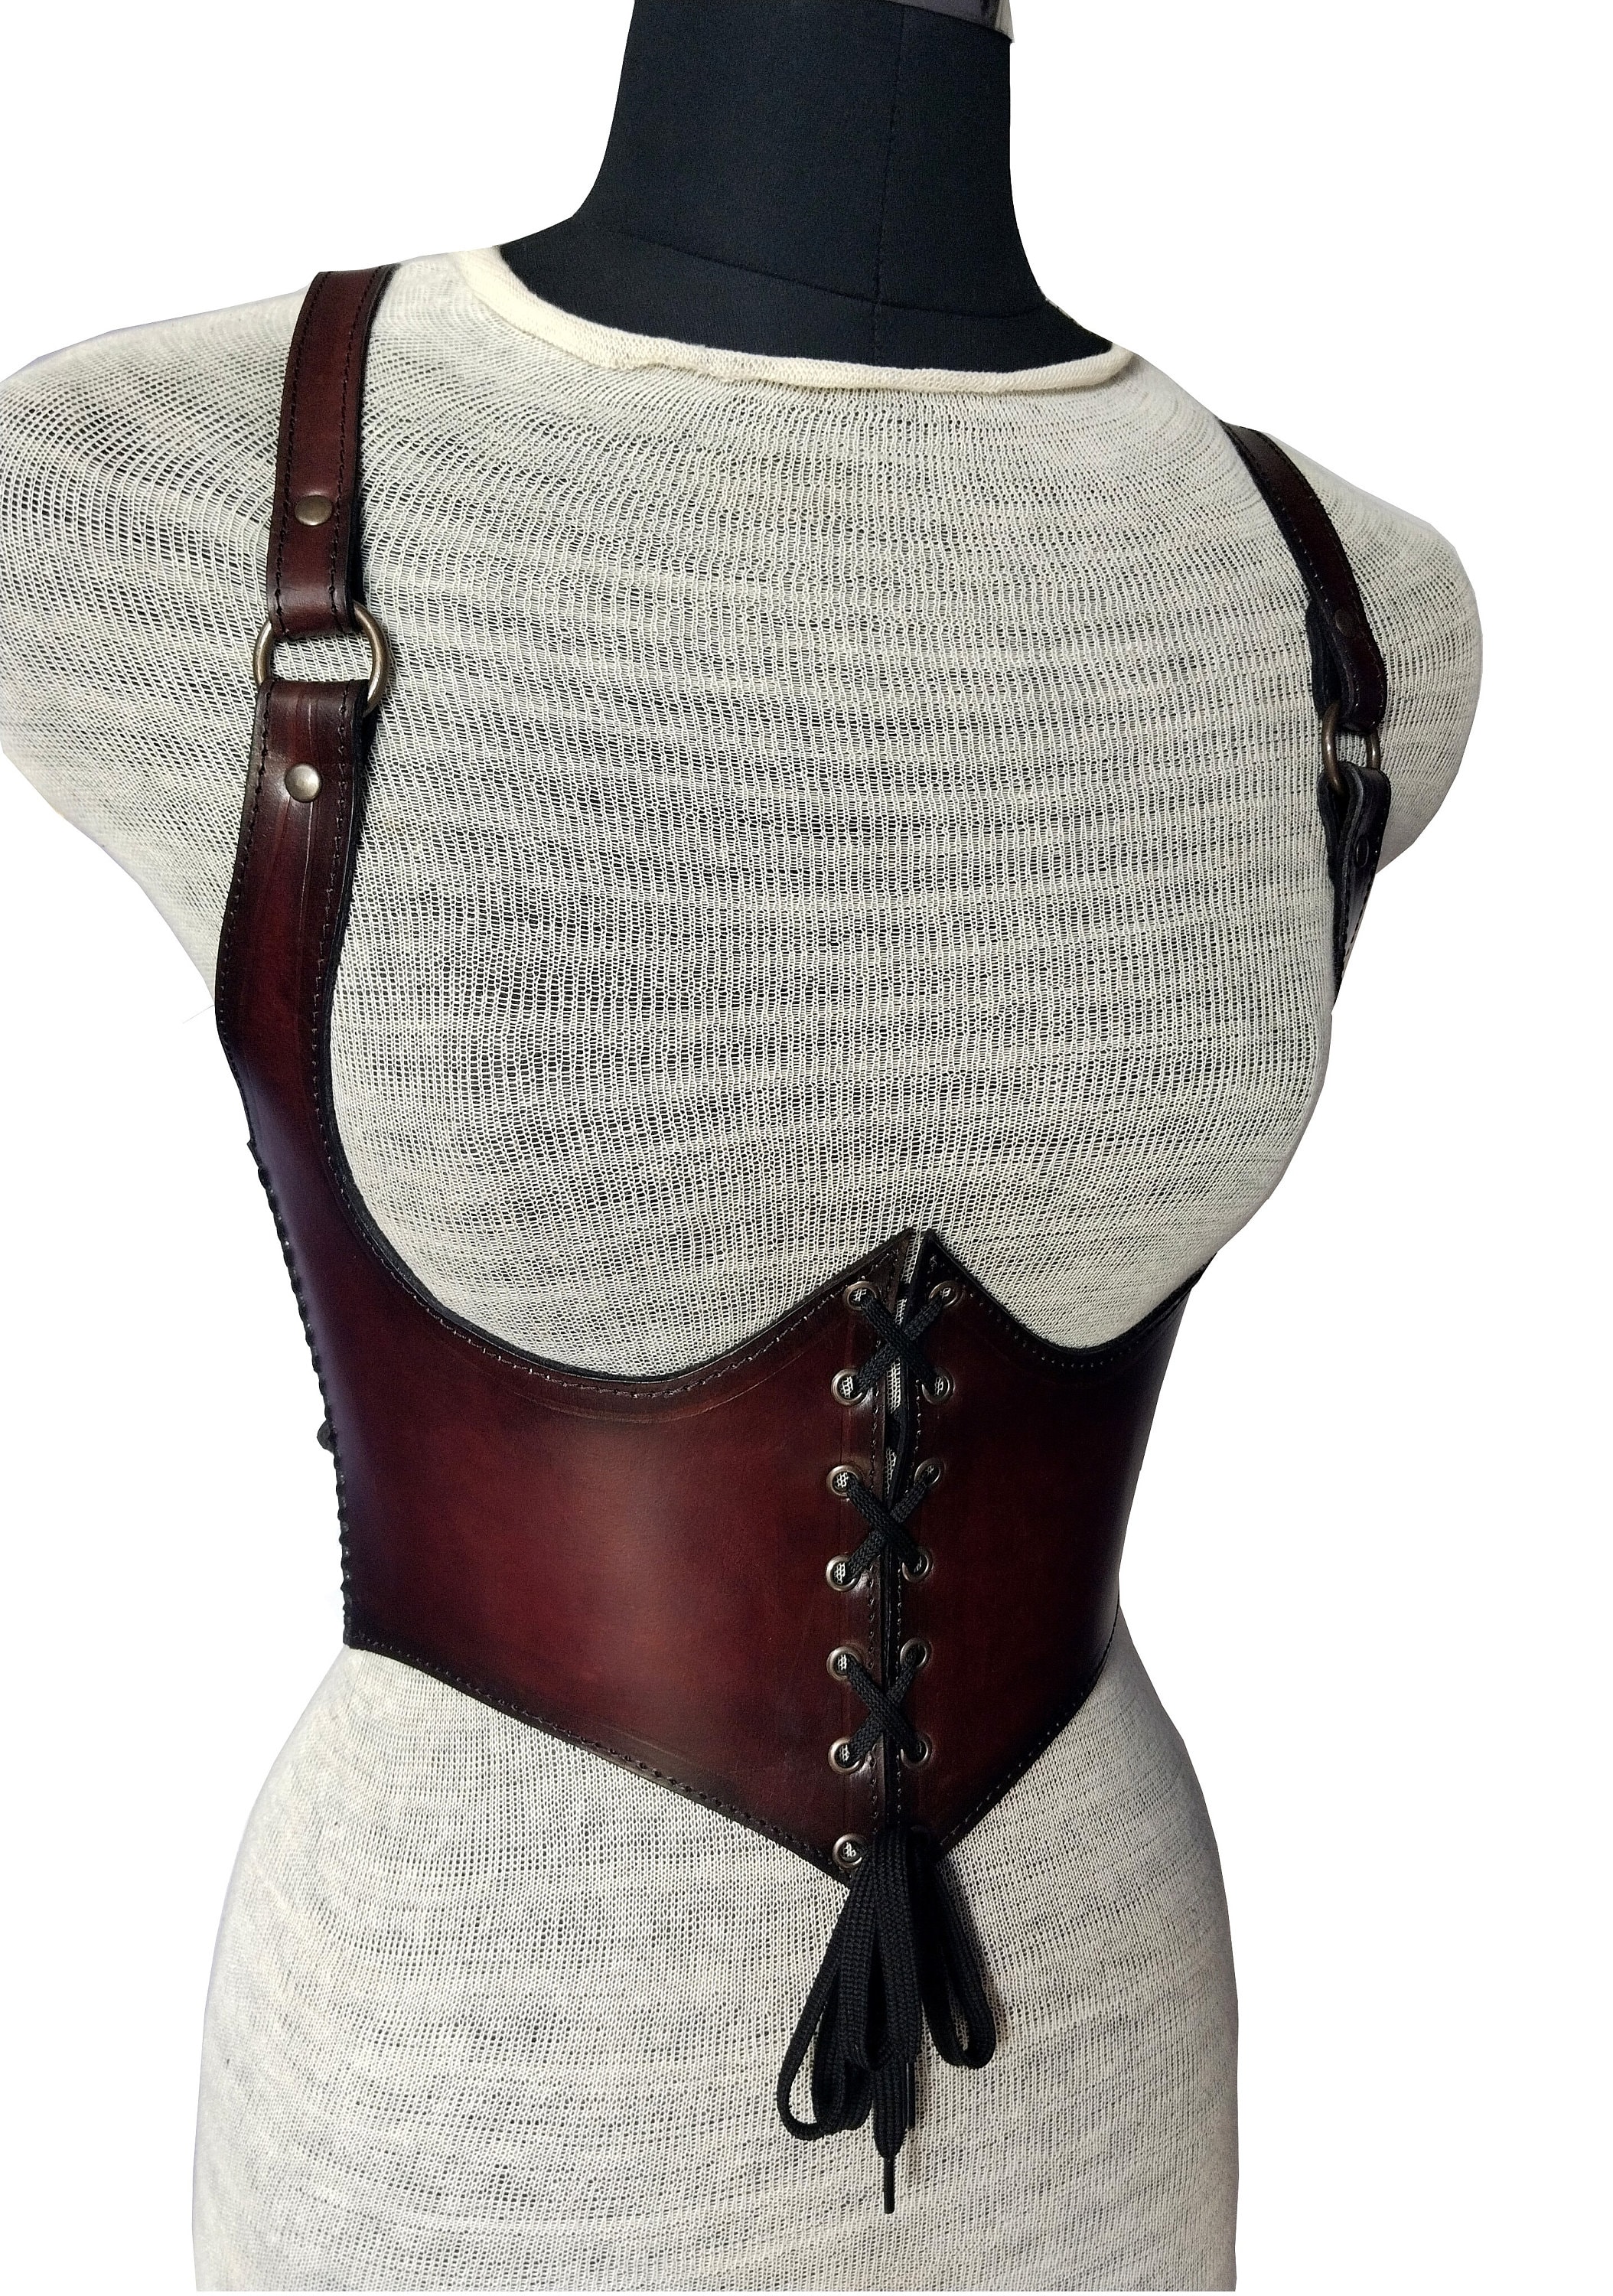 Pointed Leather Corset, Under the Bust, Laces in Front and Back